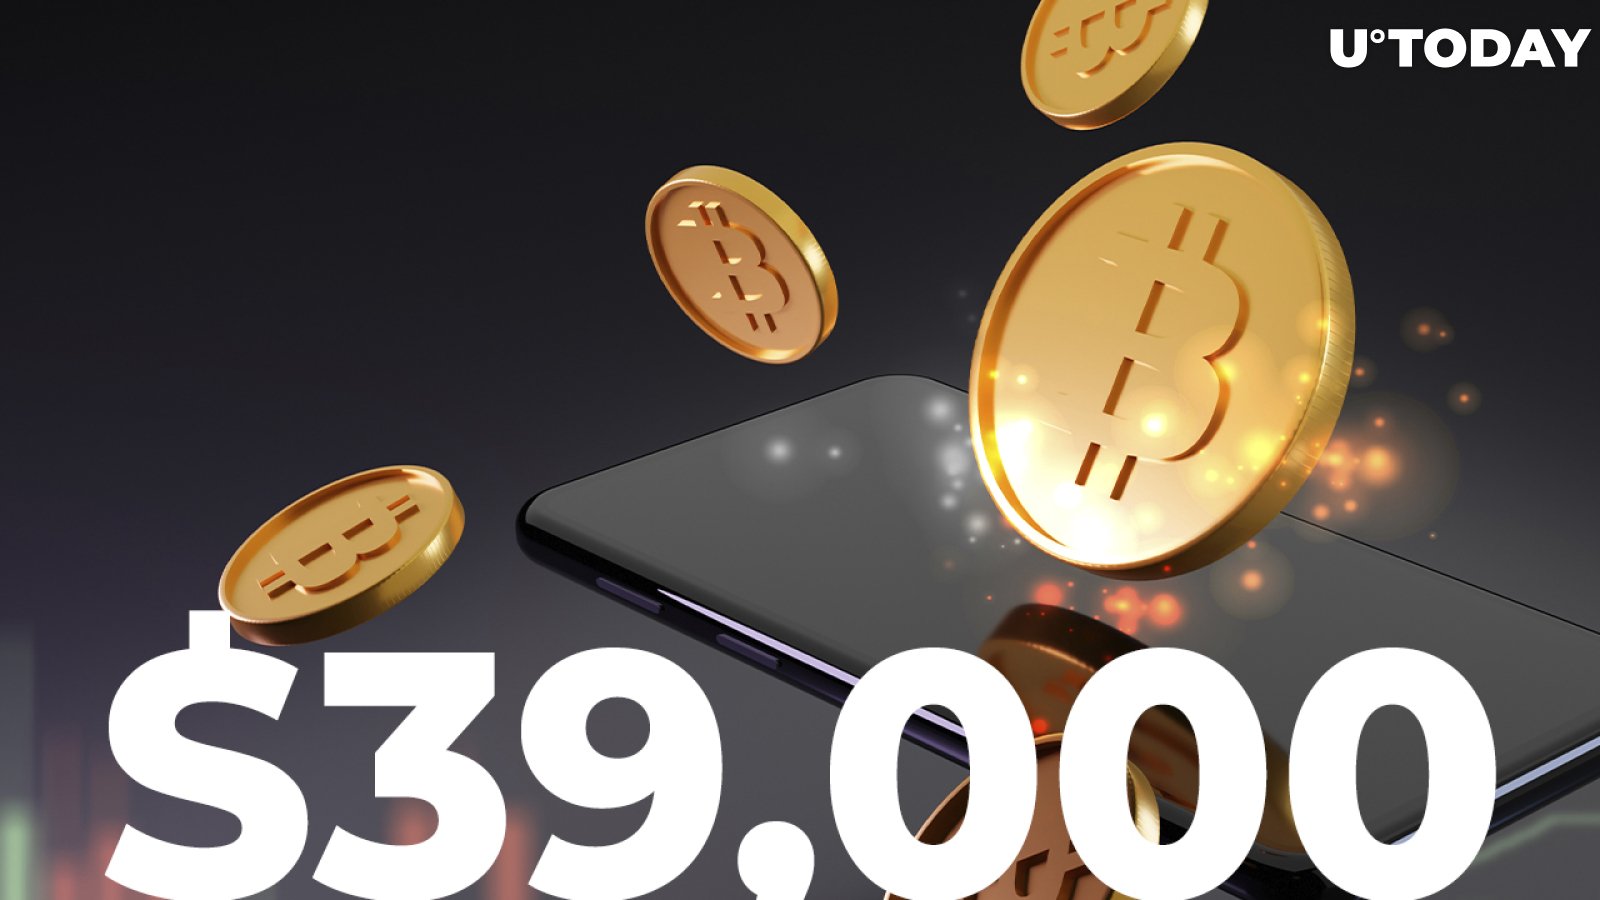 Here's Why $39,000 Is Most Important Price for Bitcoin